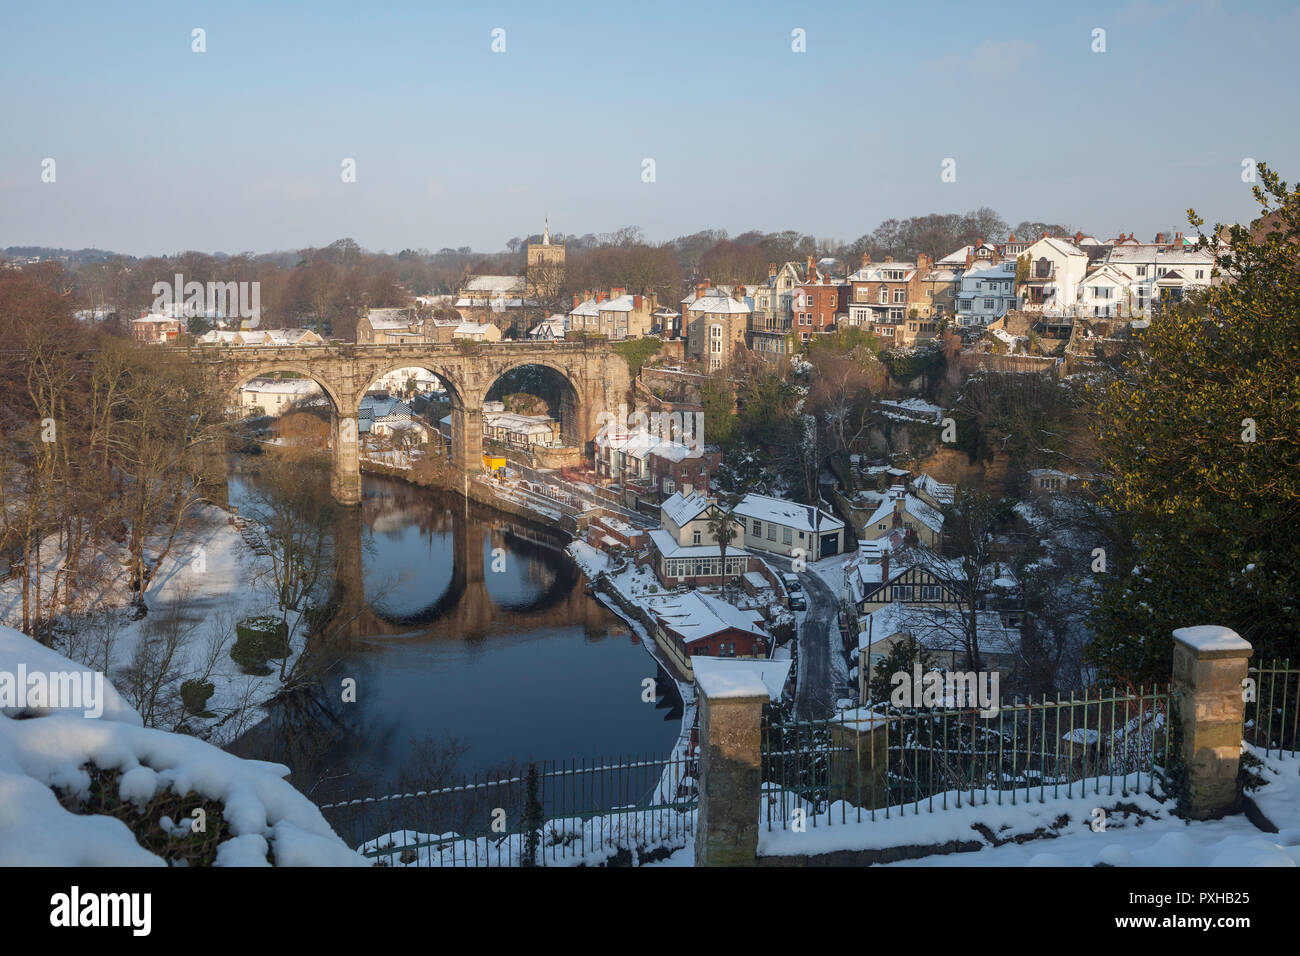 Snowy winter view of the town of Knaresborough in North Yorkshire showing the railway Viaduct and River Nidd Stock Photo